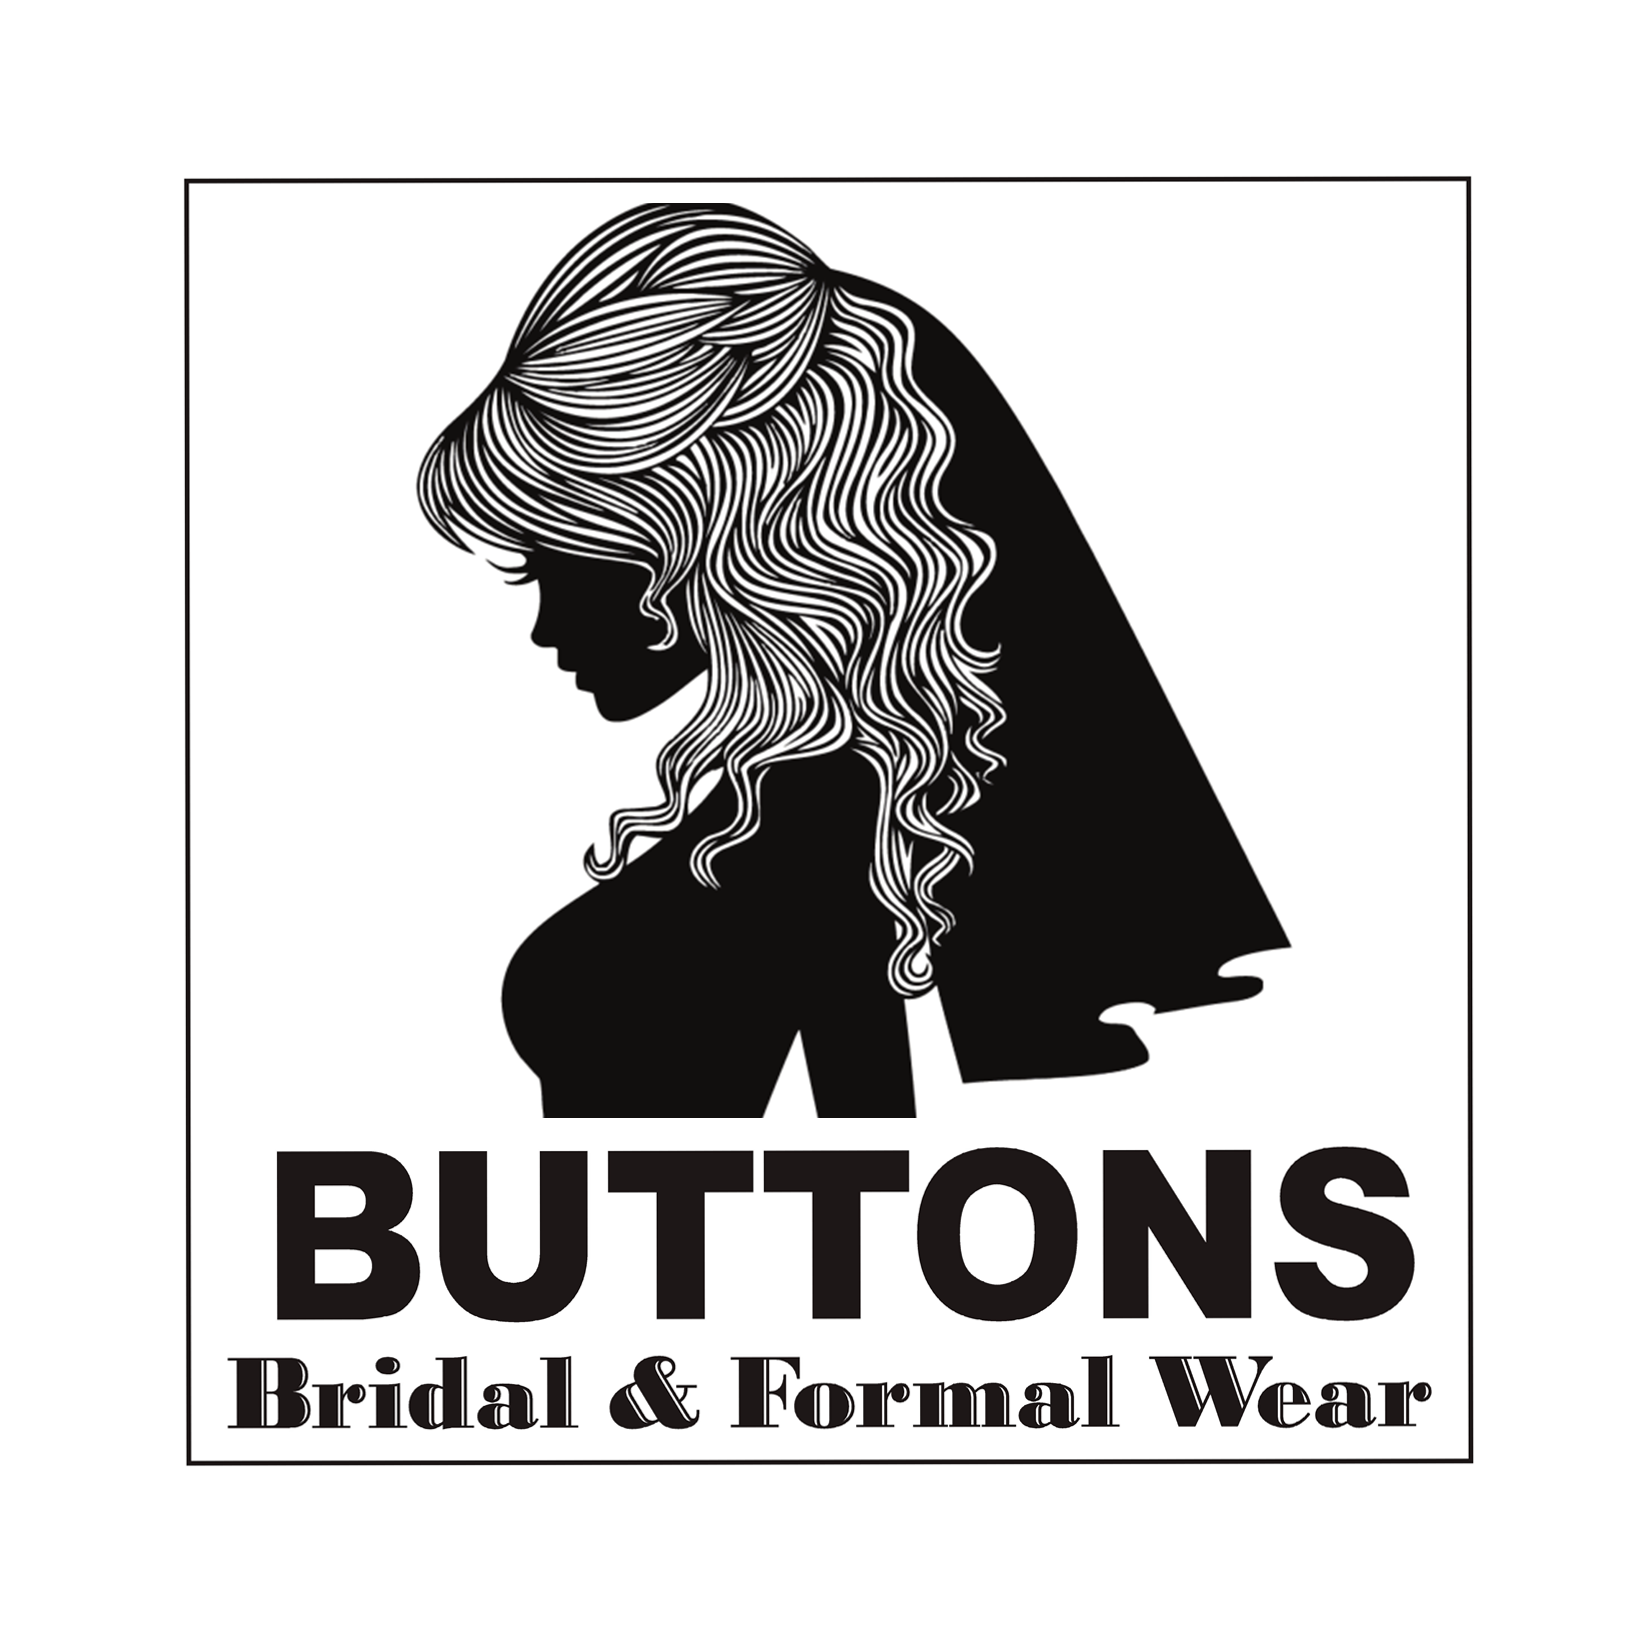 Buttons Briday & Formal Wear